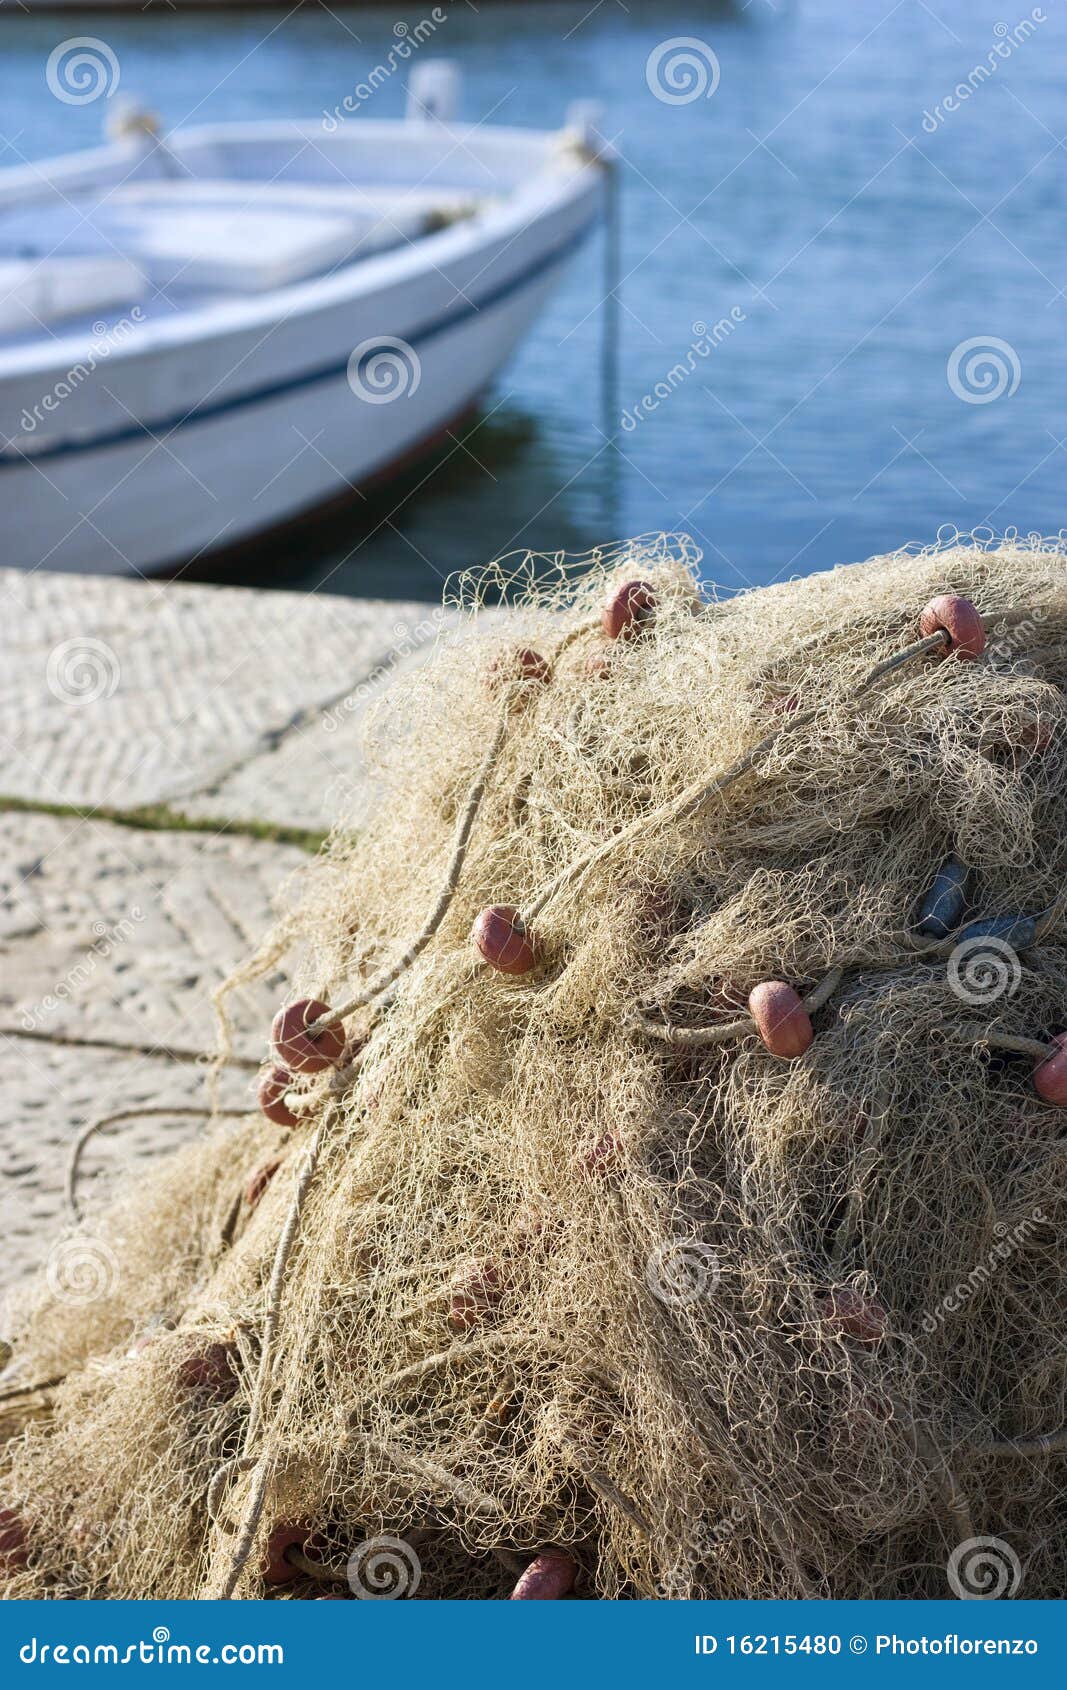 770 Old Fishing Net Cork Stock Photos - Free & Royalty-Free Stock Photos  from Dreamstime